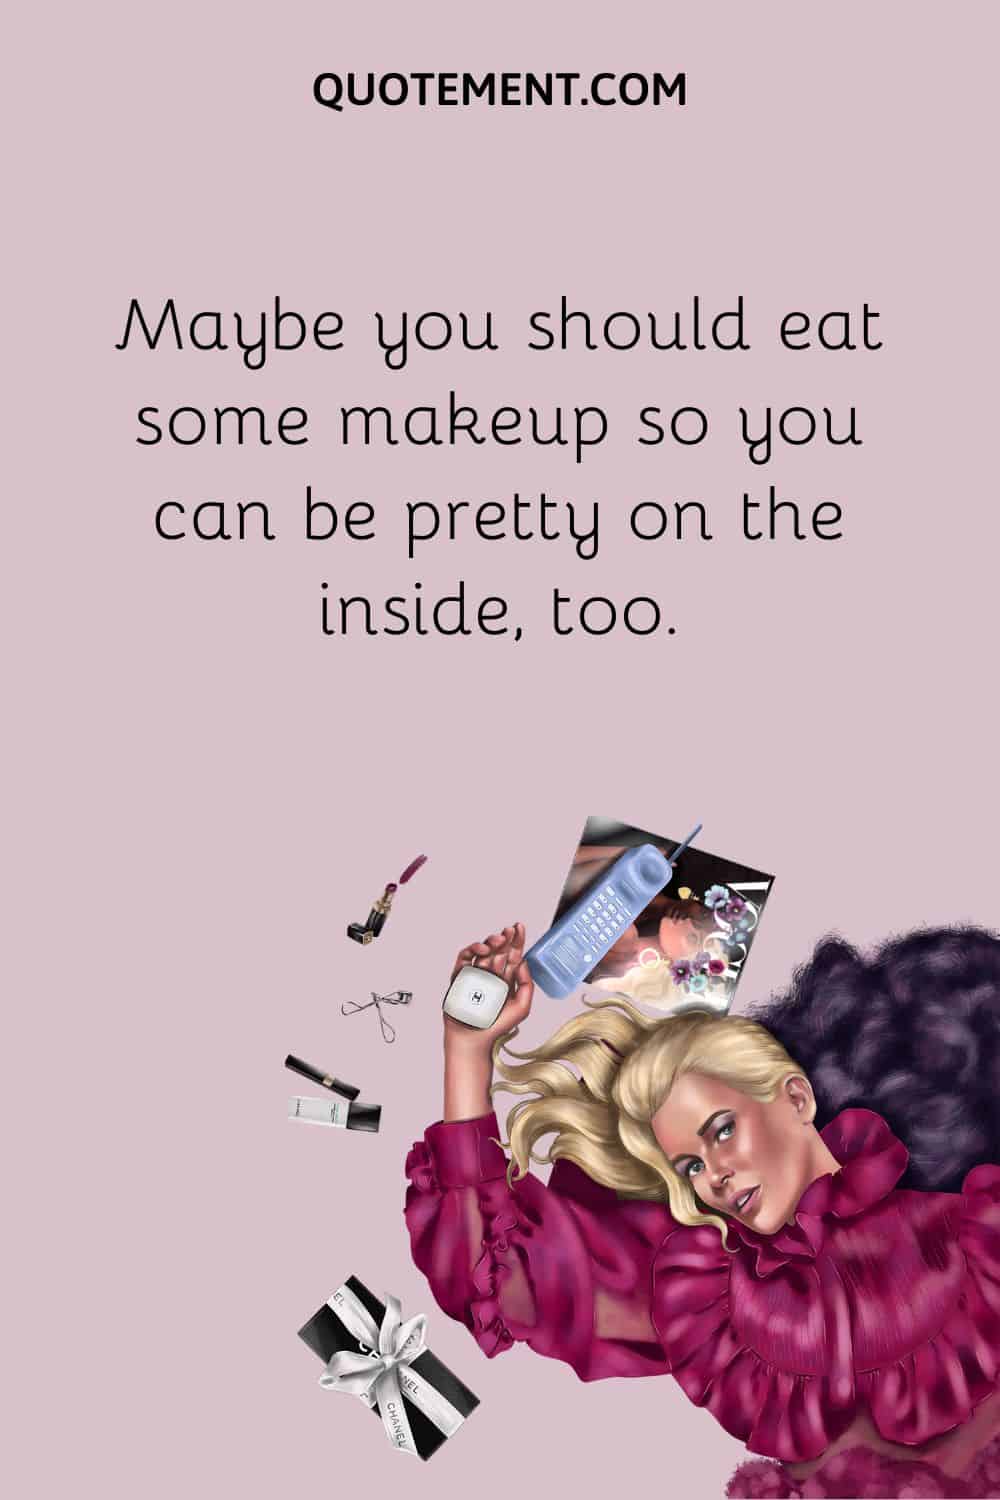 Maybe you should eat some makeup so you can be pretty on the inside